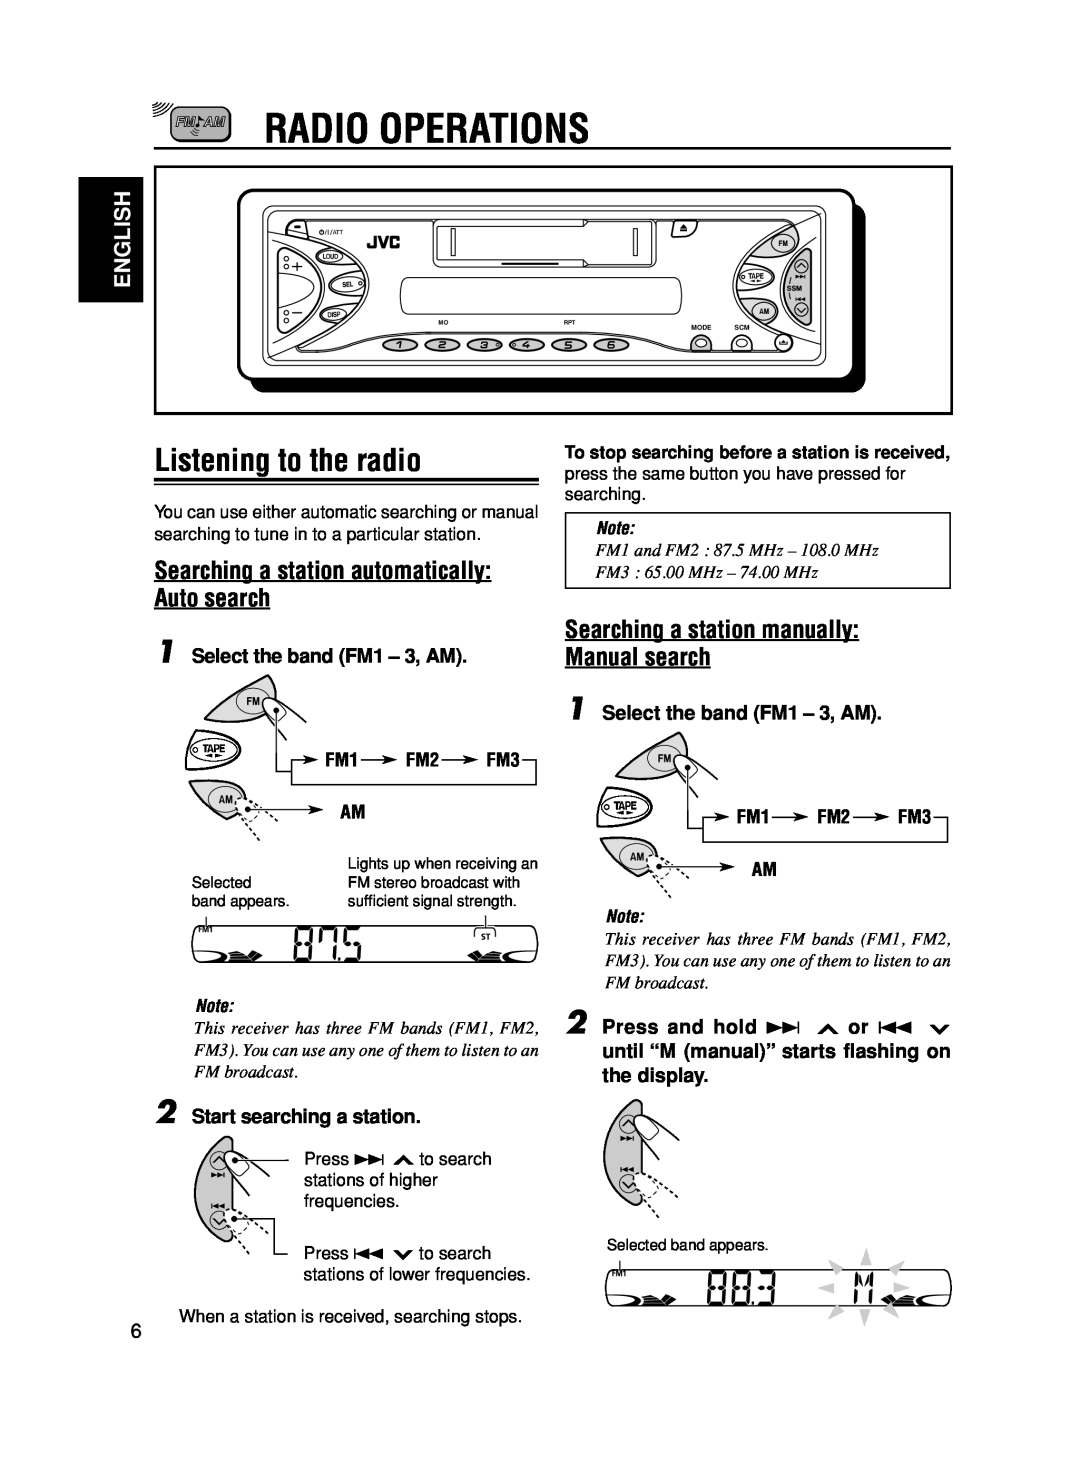 JVC KS-F545 Radio Operations, Listening to the radio, Searching a station automatically Auto search, English, Selected 